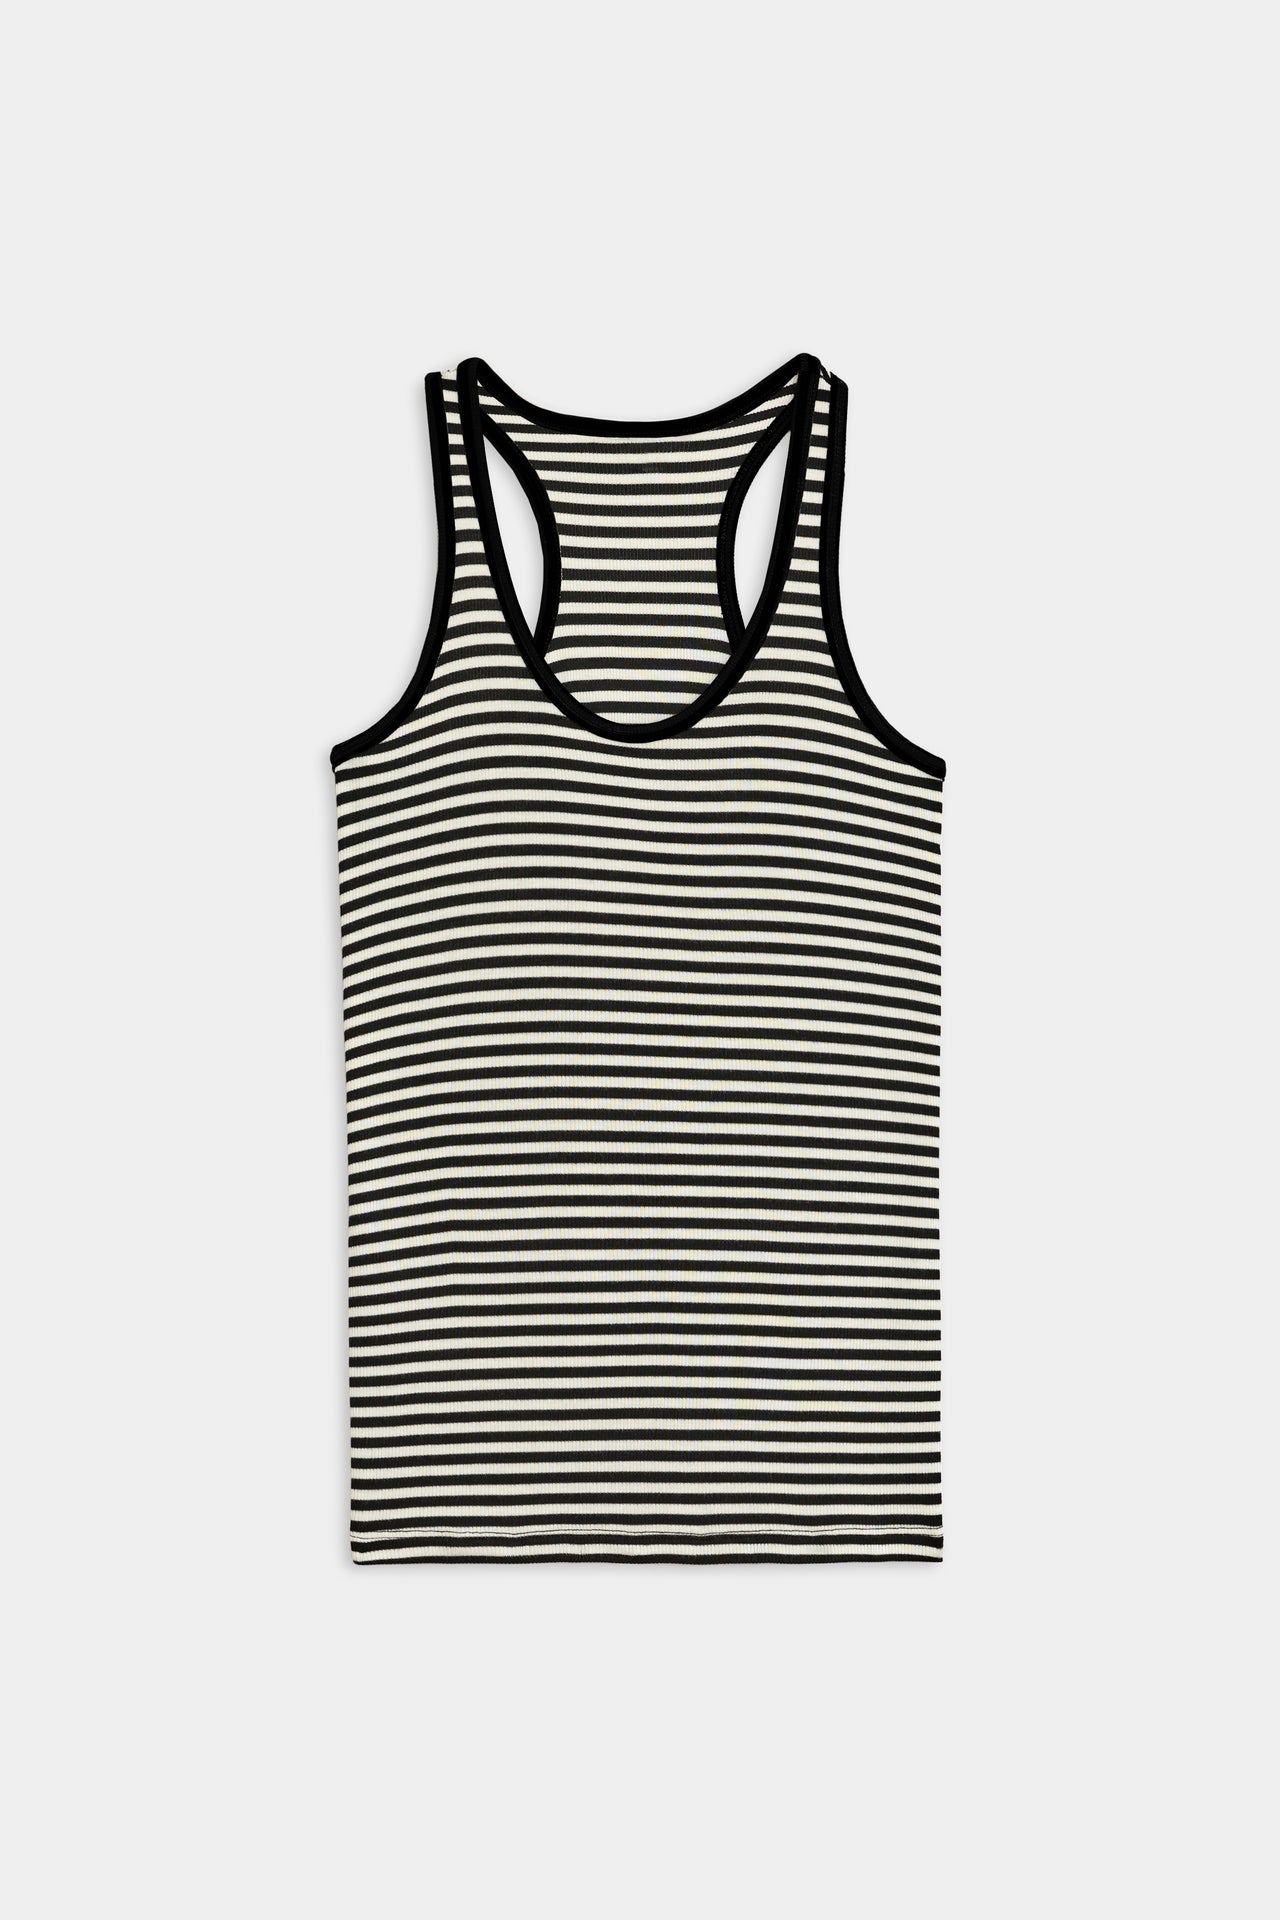 Flat view of a black and white stripe ribbed tank top 